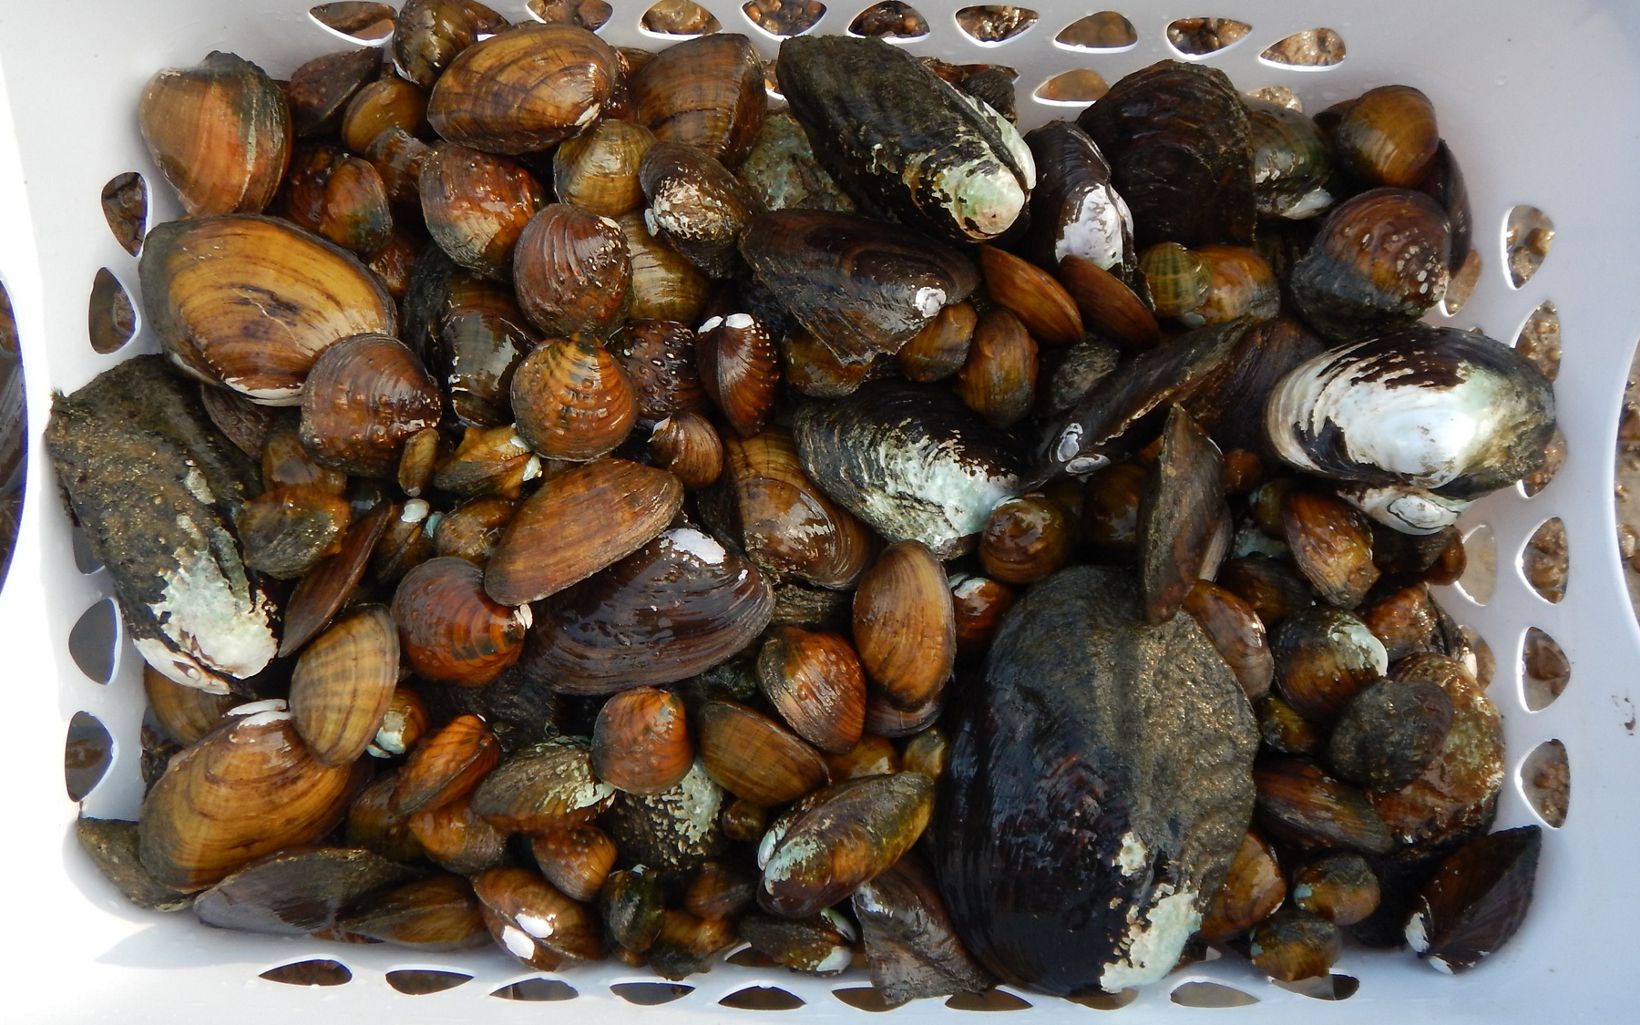 An assemblage of mussels is stored in a laundry basket.